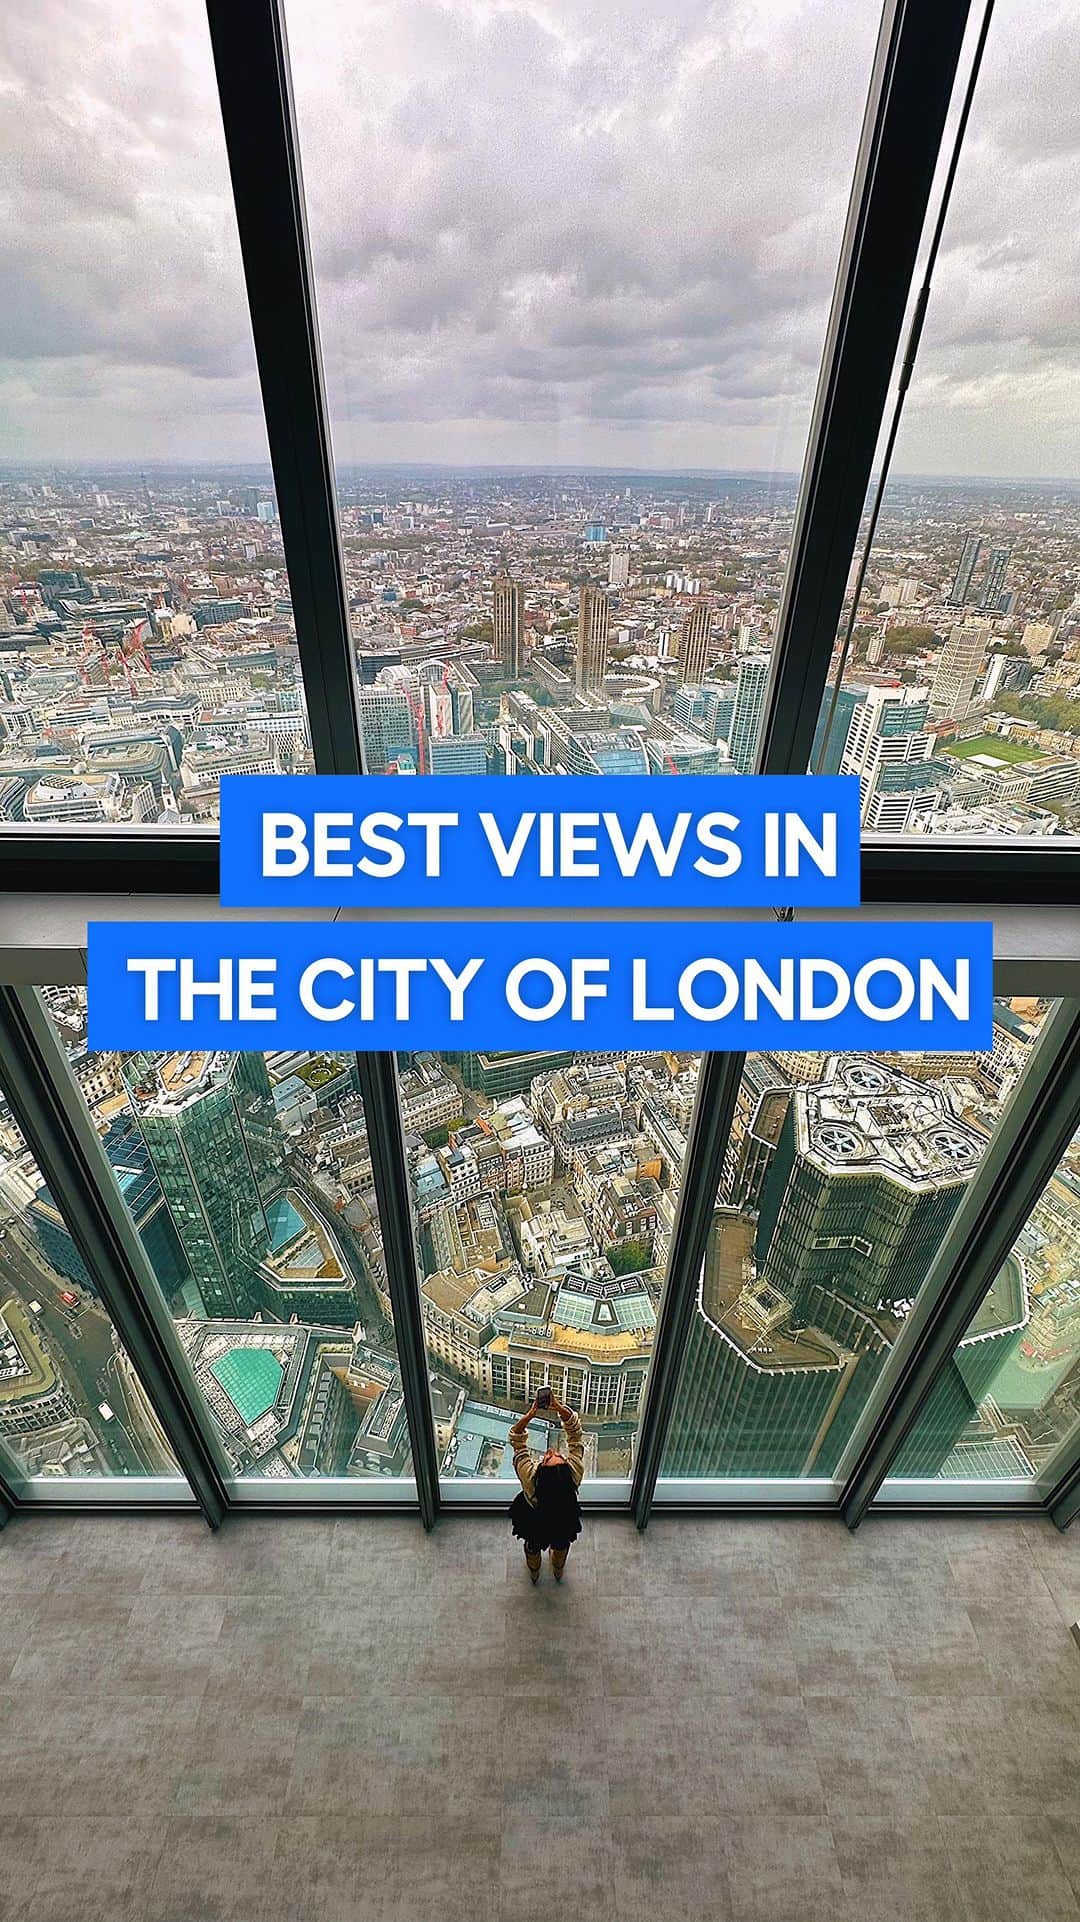 @LONDON | TAG #THISISLONDONのインスタグラム：「ad 🏙️🍹Looking for the best views in @TheCityOfLDN ?! 🤩 @MrLondon & @Alice.Sampo with 5 great #CityOfLondon tips! Bookmark this post! 🔖    1. @FloratticaRooftopLondon - hidden oasis 🌴 stunning city views, interiors inspired by East London’s rich textile history, fantastic food 🍽️ and drinks 🍹on a cosy terrace.    2. @Horizon22b - Europe’s highest FREE viewing gallery - 58th Floor of #22Bishopsgate - The City of London’s tallest building! 😱 Spectacular panoramic views of London! 🌆    3. @TheLookout.LDN - another exciting and newly opened free-to-view gallery, 50th Floor of #8Bishopsgate, a quiet space, with uninterrupted views of London’s iconic landmarks! 🏙️   4. @SavageGardenLDN - London’s wildest rooftop bar with theatrical cocktails🍹and food 🍽️ that is savagely good! Head here for spectacular views over the City of London and Tower Bridge! 🌆   5. @SabineRooftopBar - a sanctuary, next to #StPaulsCathedral, perfect for after work drinks 🥂 or weekend lounging, with refreshing cocktails 🍹and delicious bar snacks! 🍽️   Enjoy! ❤️ #TheCityOfLDN  ❤️ @wilkinsoneyre @stanhope_plc @arupgroup ❤️  ___________________________________________  #thisislondon #lovelondon #london #londra #londonlife #londres #uk #visitlondon #british #🇬🇧 #whattodoinlondon #londonreviewed #foodiesoflondon #londonfoodies #londonfoodie #londonfood #londonrestaurants #londonbars #londonrooftop #londonviews」